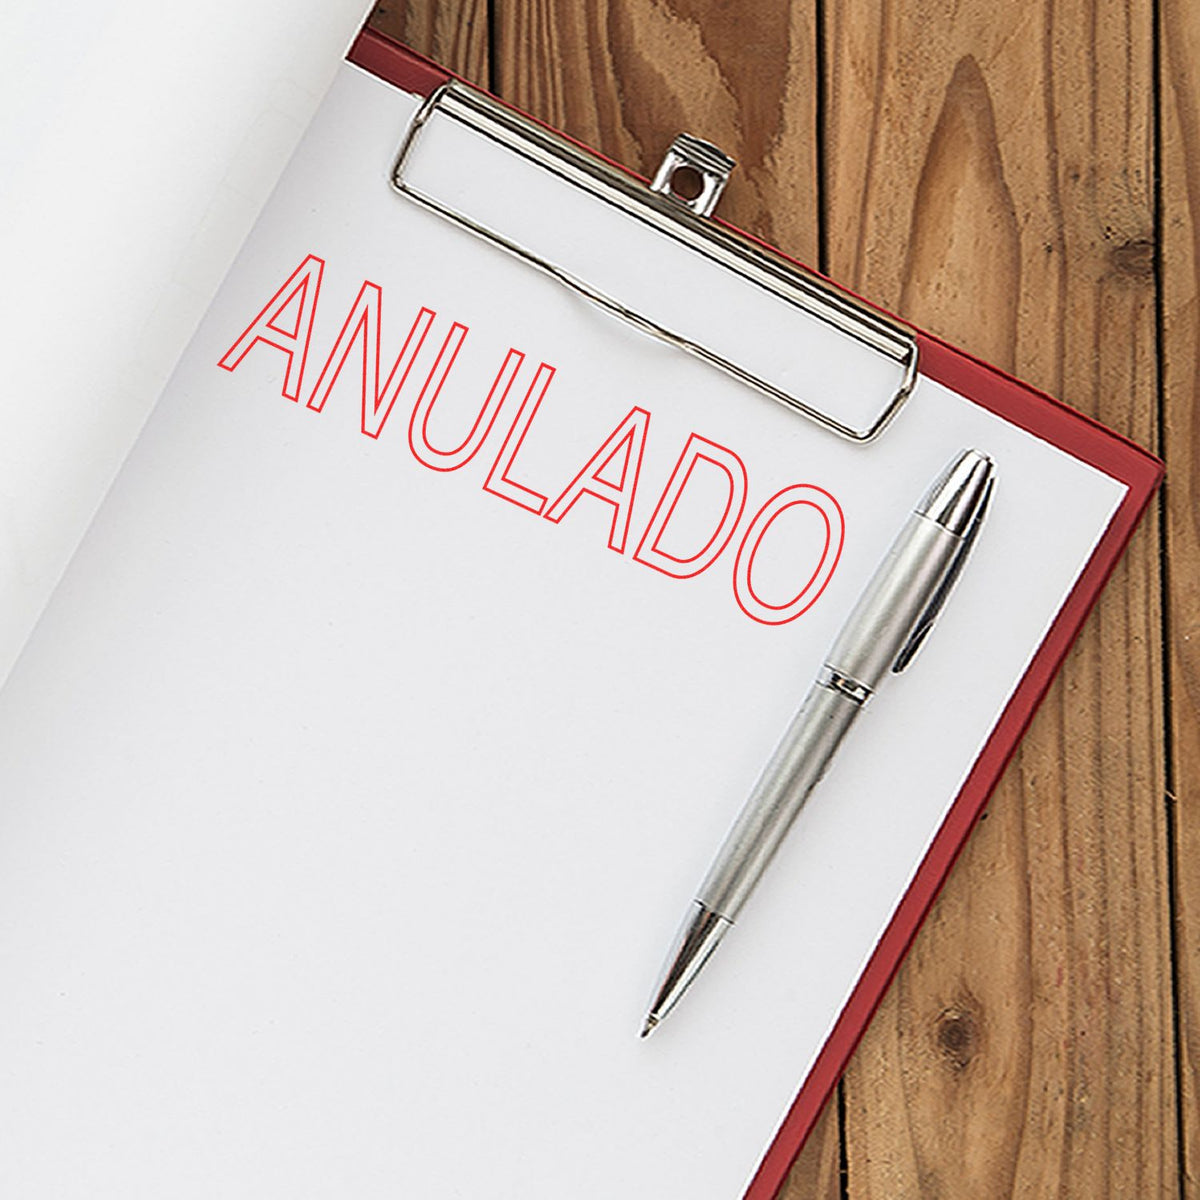 Large Self-Inking Outline Anulado Stamp In Use Photo